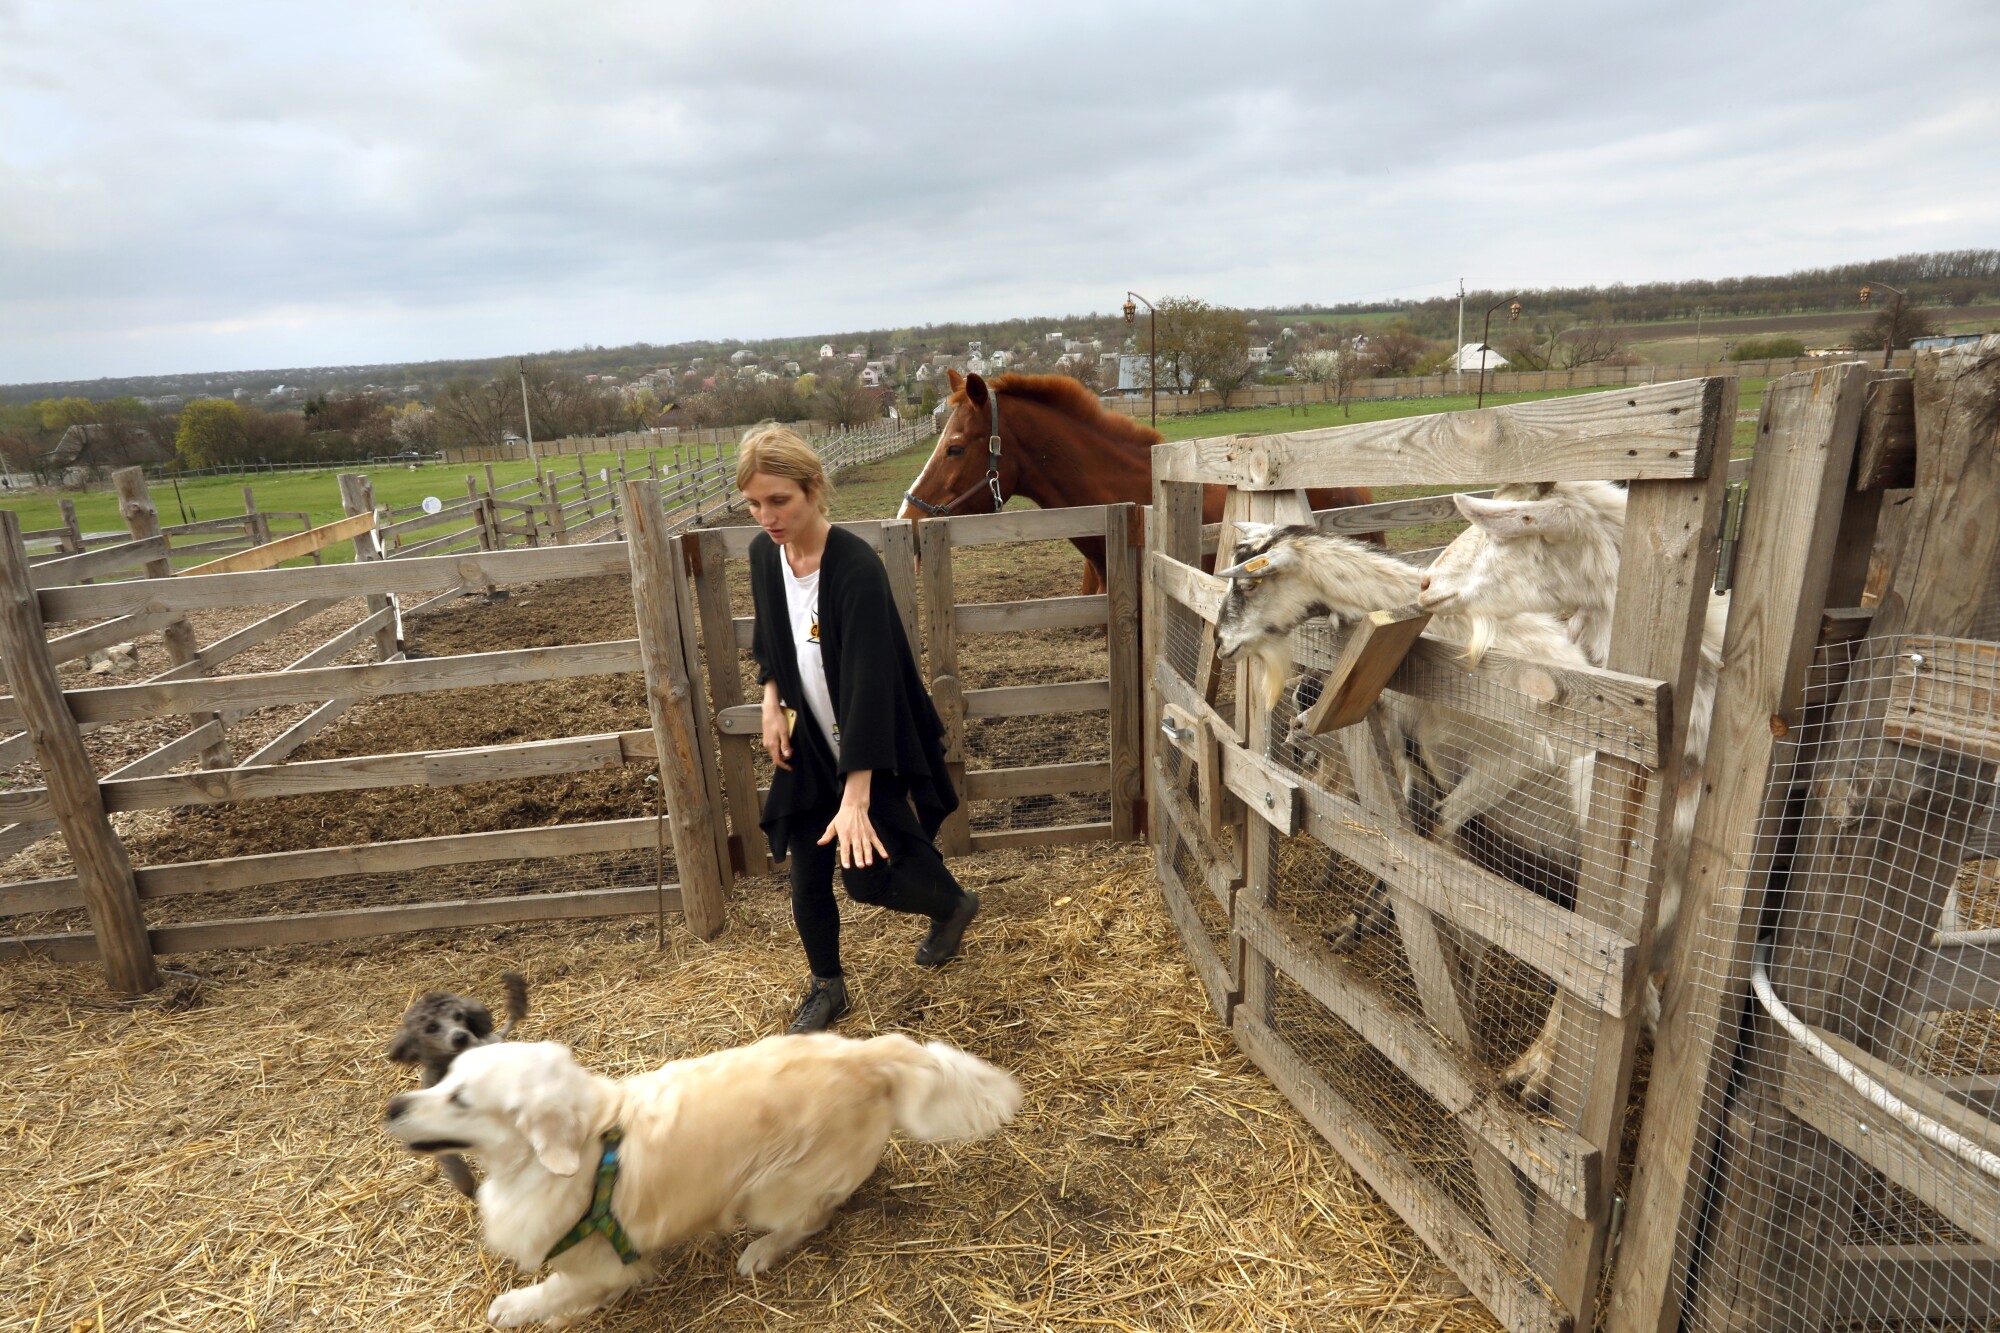 A woman with two dogs on the farm